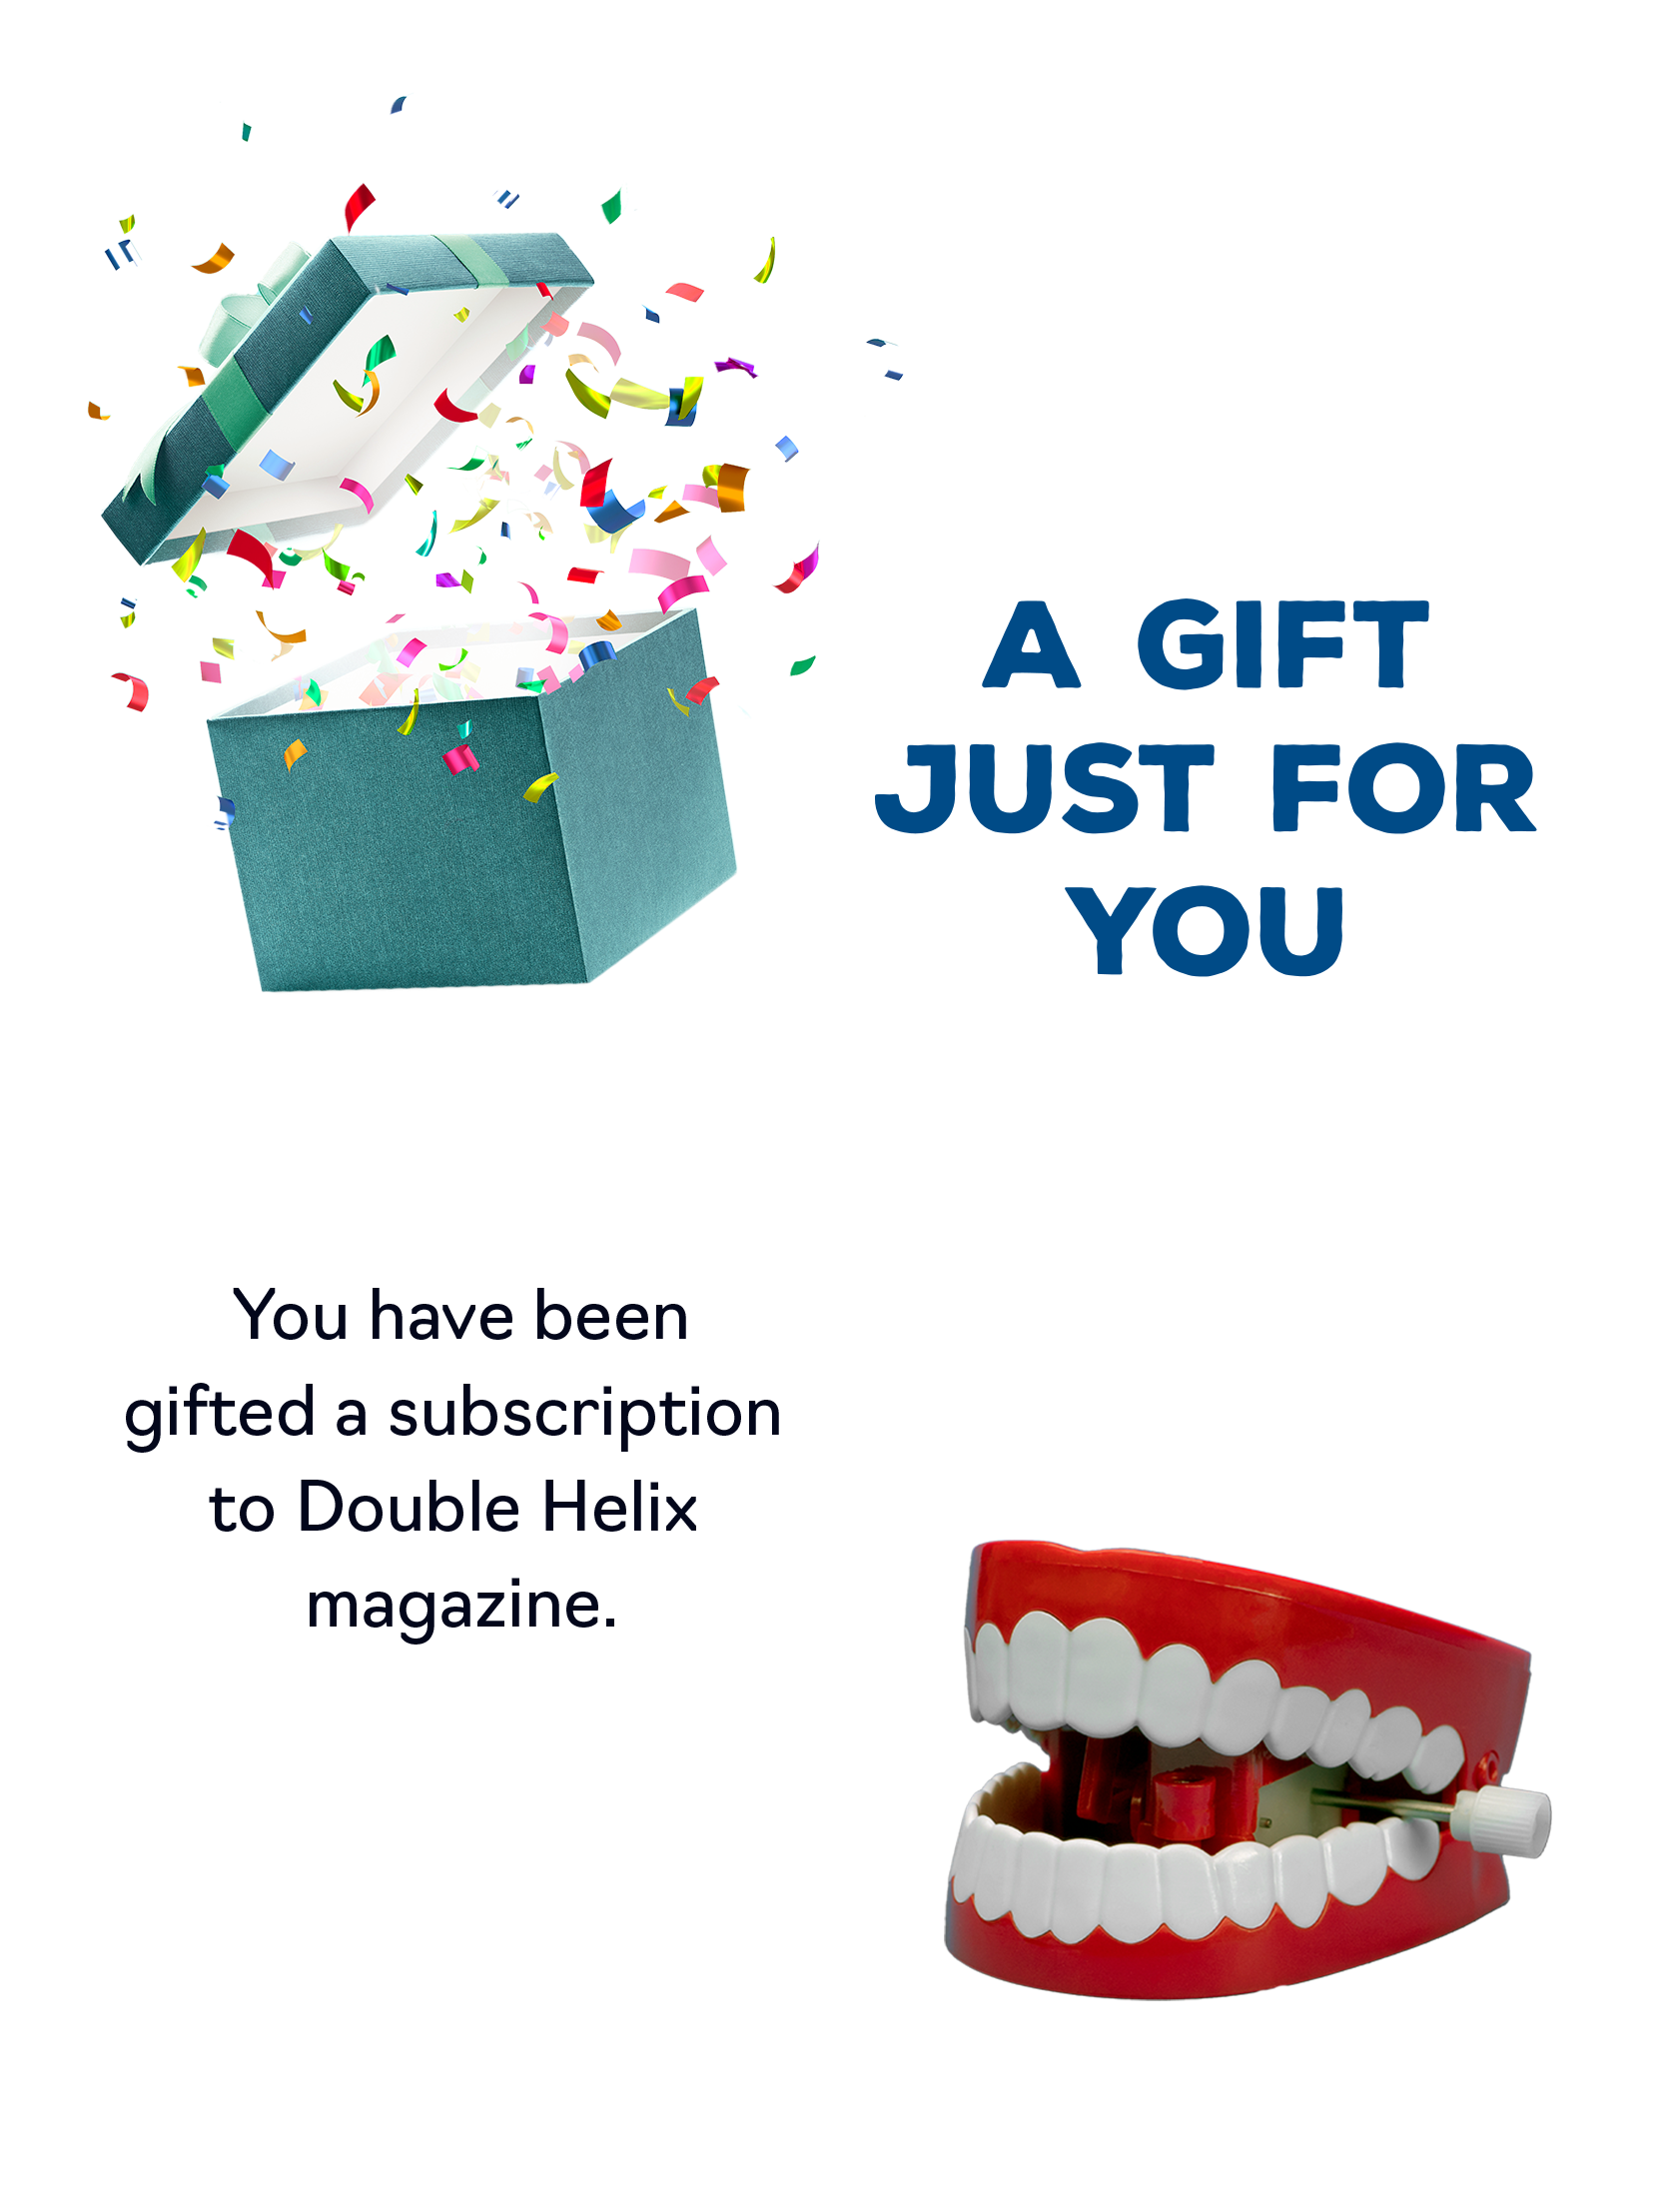 Ad for gift subscriptions - A gift just for you - You have been gifted a subscription to Double Helix magazine